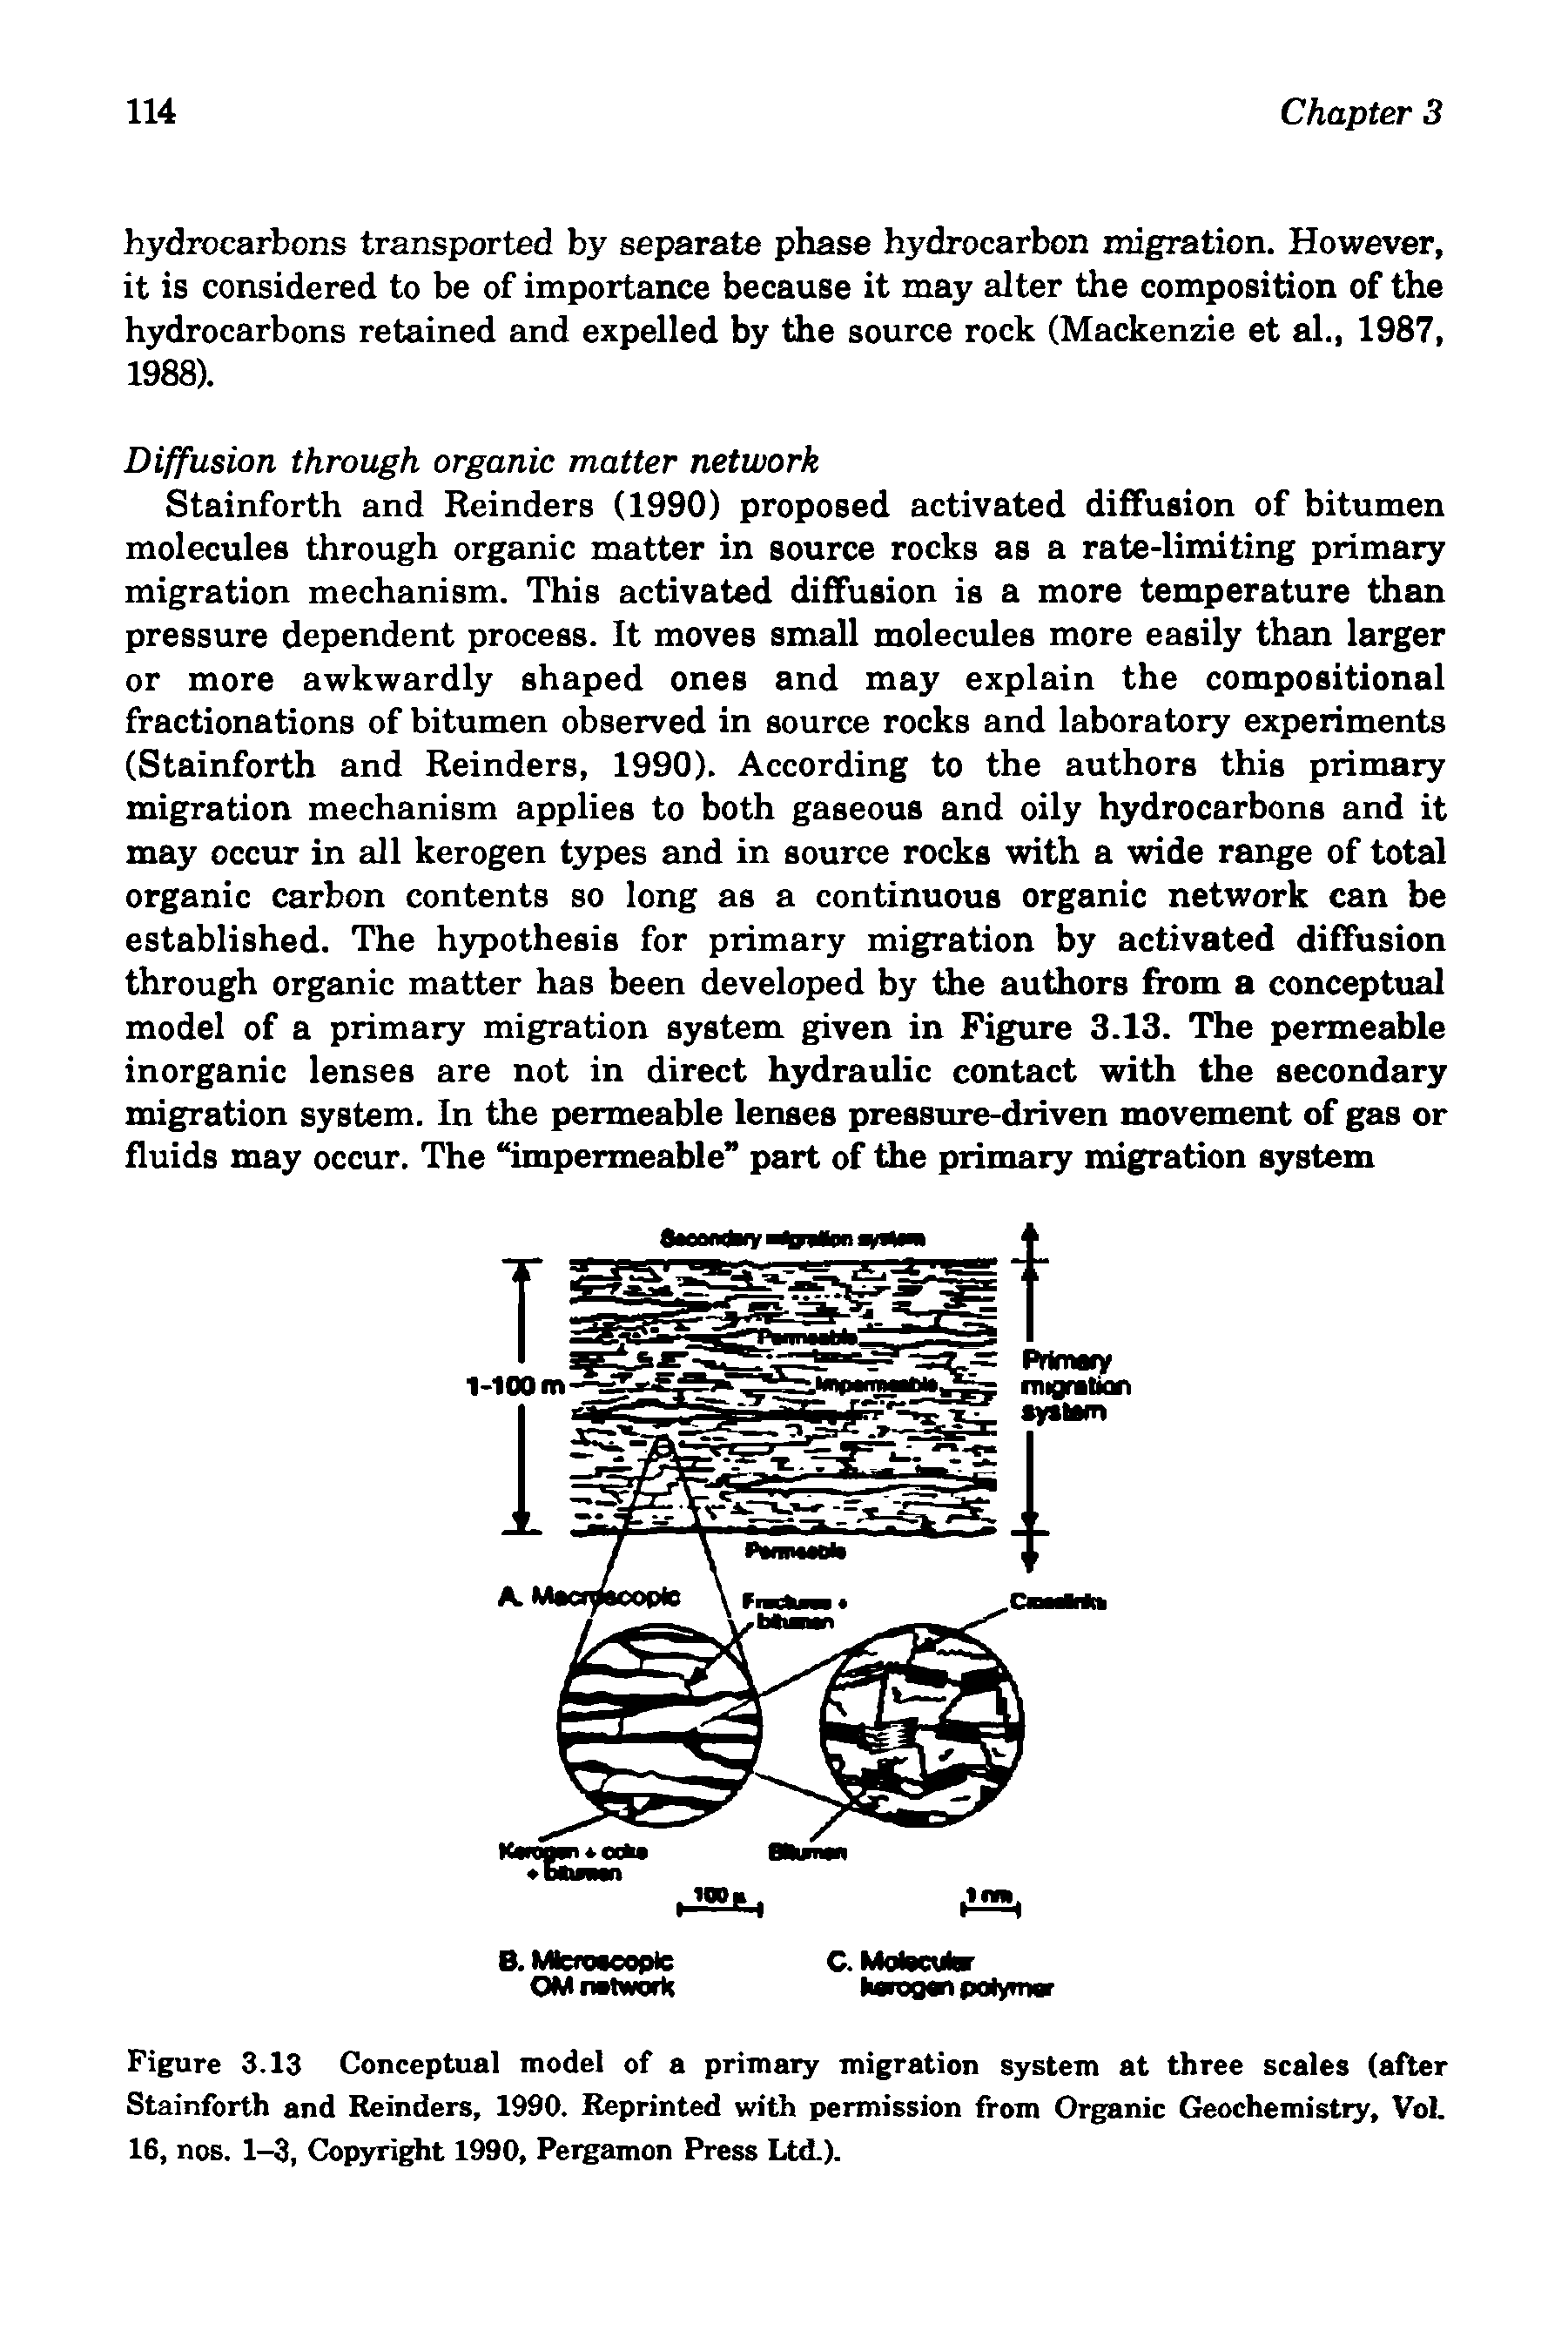 Figure 3.13 Conceptual model of a primary migration system at three scales (after Stainforth and Reinders, 1990. Reprinted with permission from Organic Geochemistry, Vol. 16, nos. 1-3, Copyright 1990, Peigamon Press Ltd.).